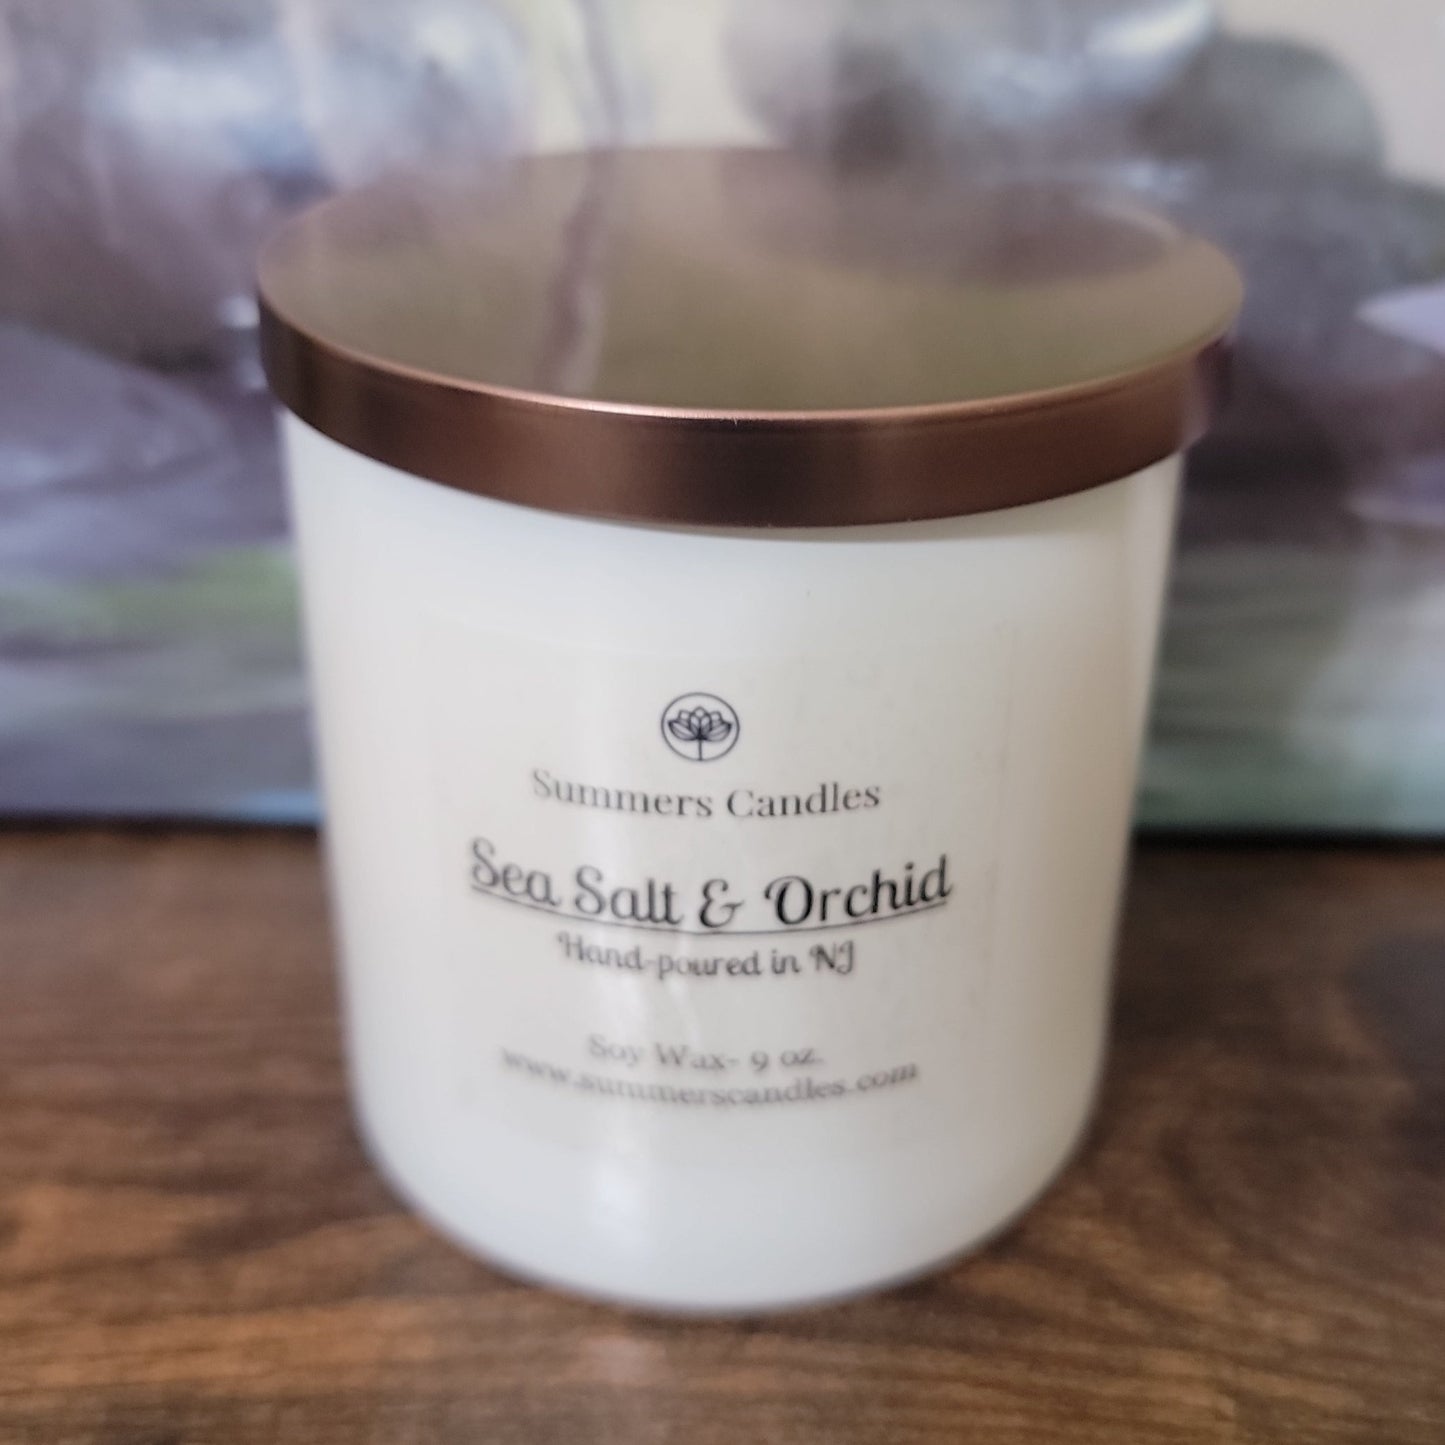 Sea Salt Orchid Scented Candles